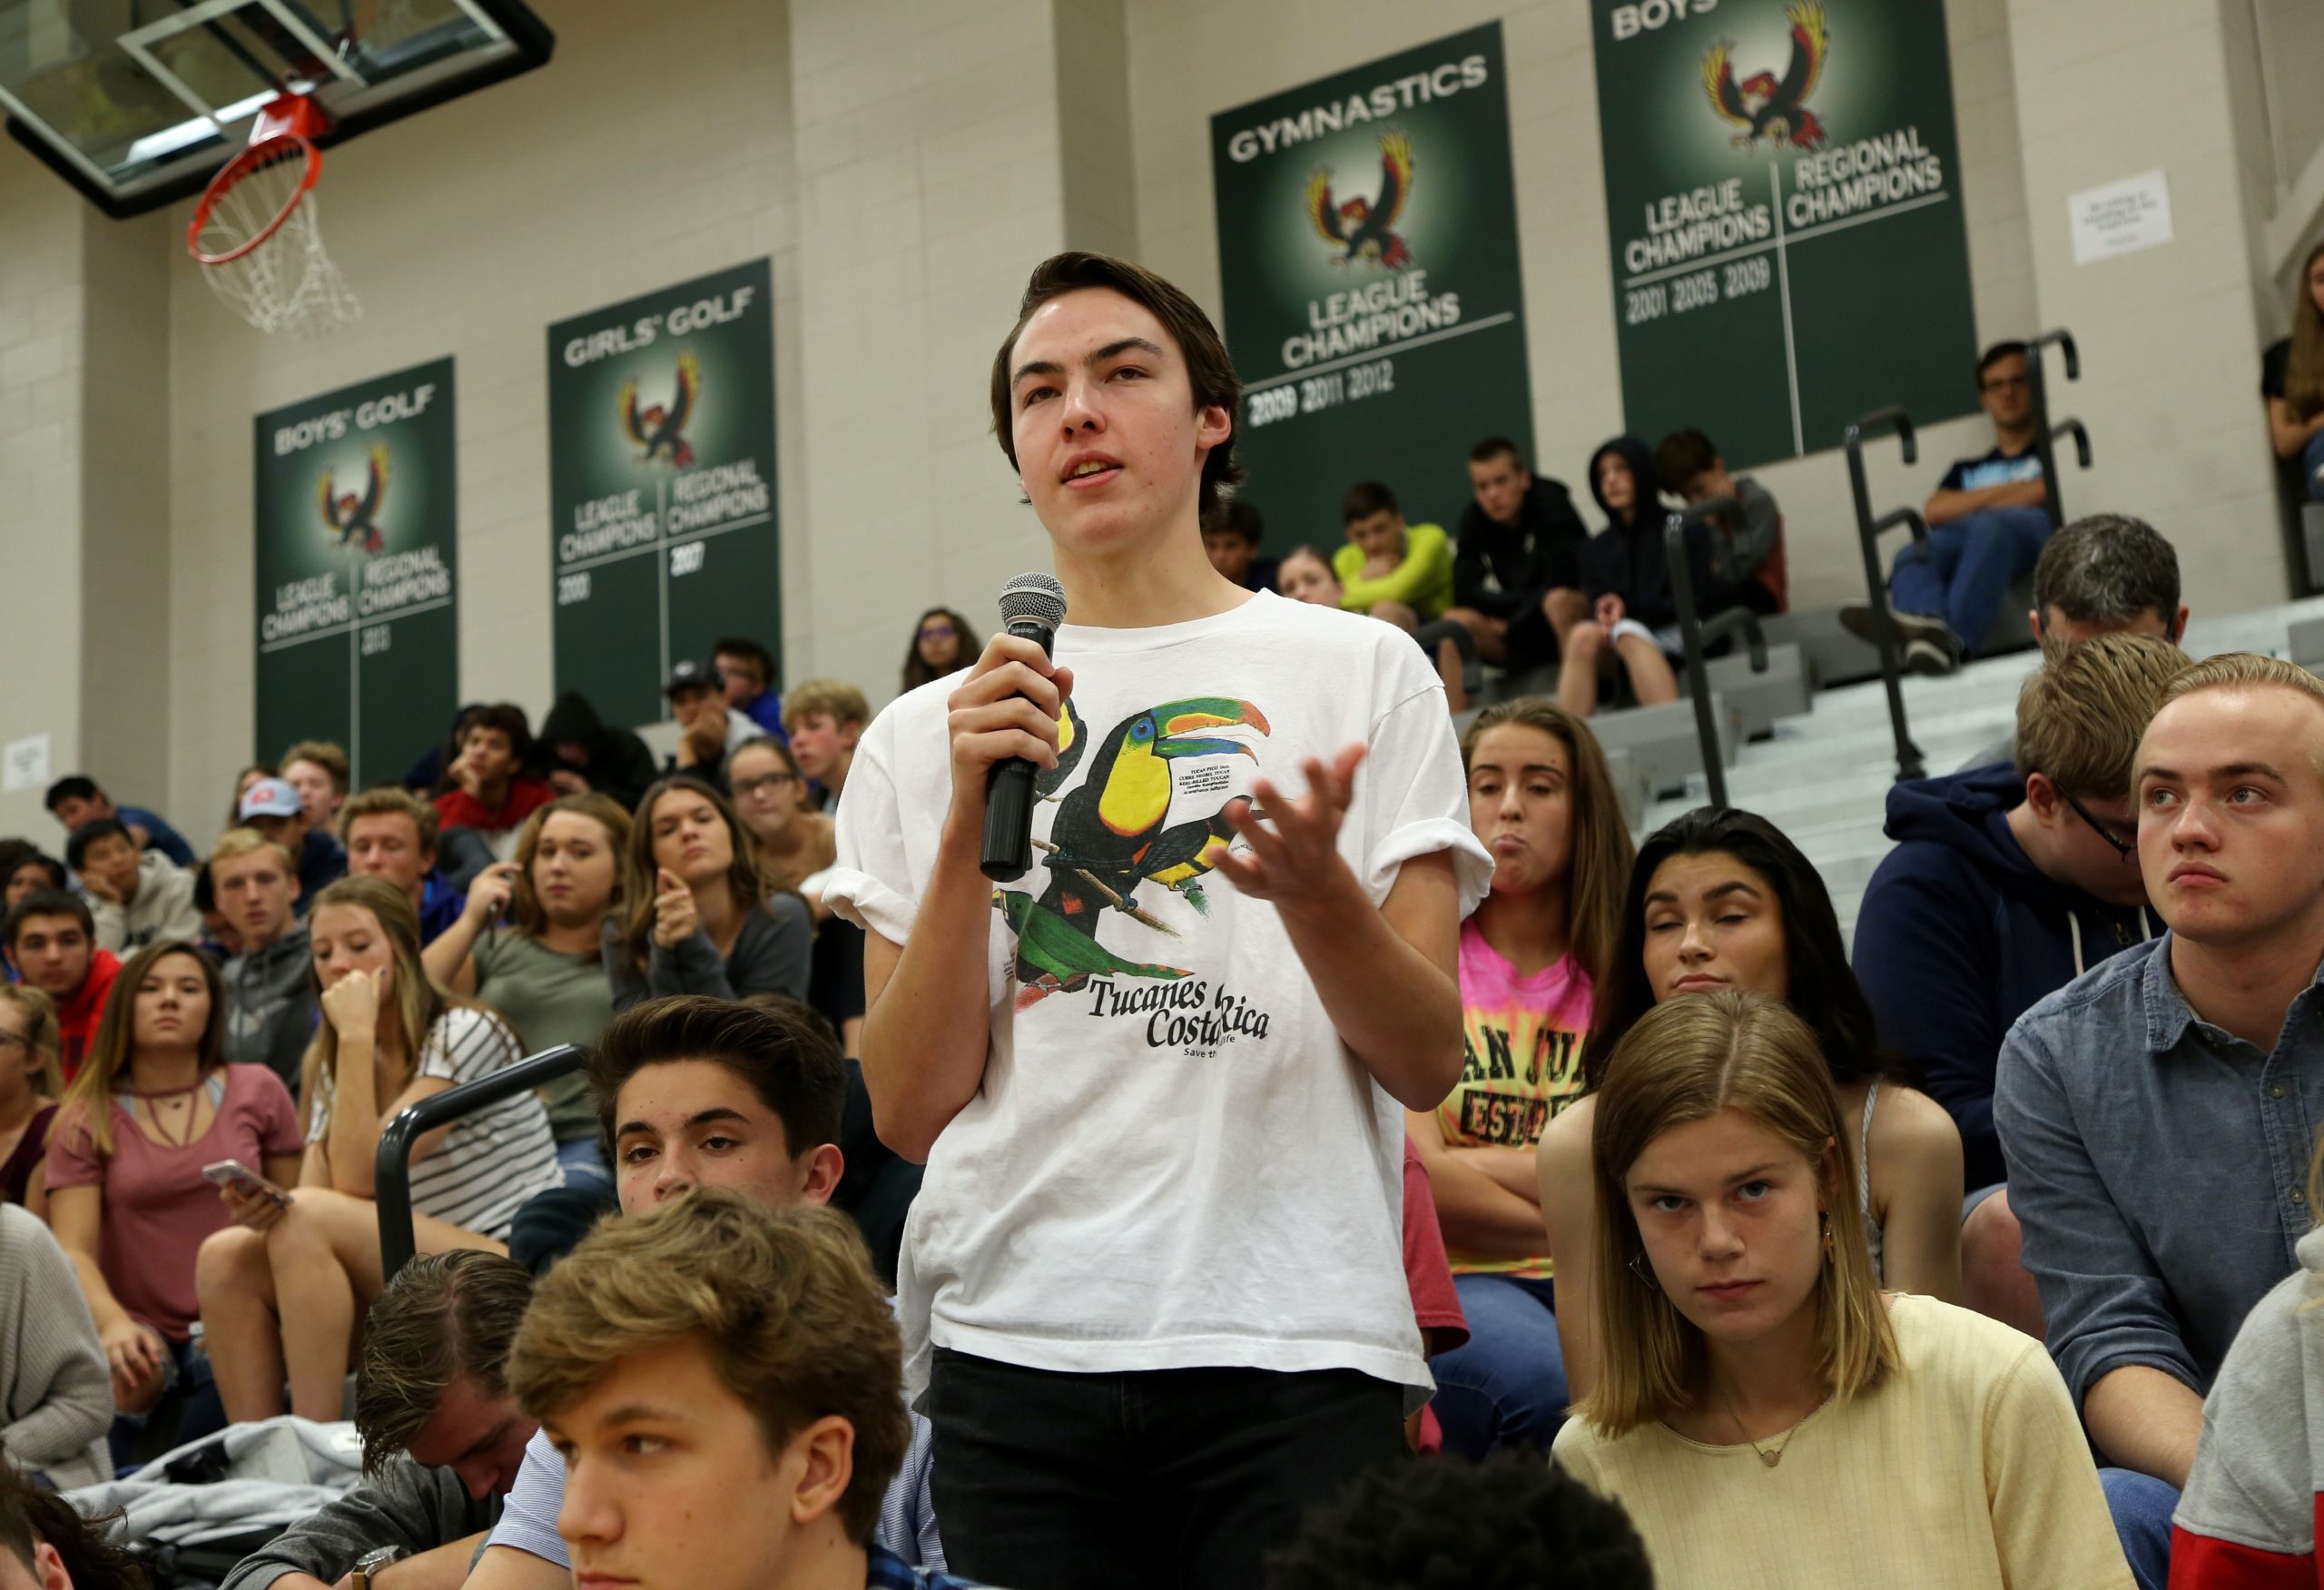 Free State High School student Chris Pendry asks as question during a forum with the four teenage candidates for Kansas Governor at Free State High School in Lawrence, Kansas, on October 19, 2017. The state of Kansas has no age restrictions for gubernatorial candidates. The mid-term election will be held on November 6, 2018. / AFP PHOTO / Christopher Smith (Photo credit should read CHRISTOPHER SMITH/AFP via Getty Images)